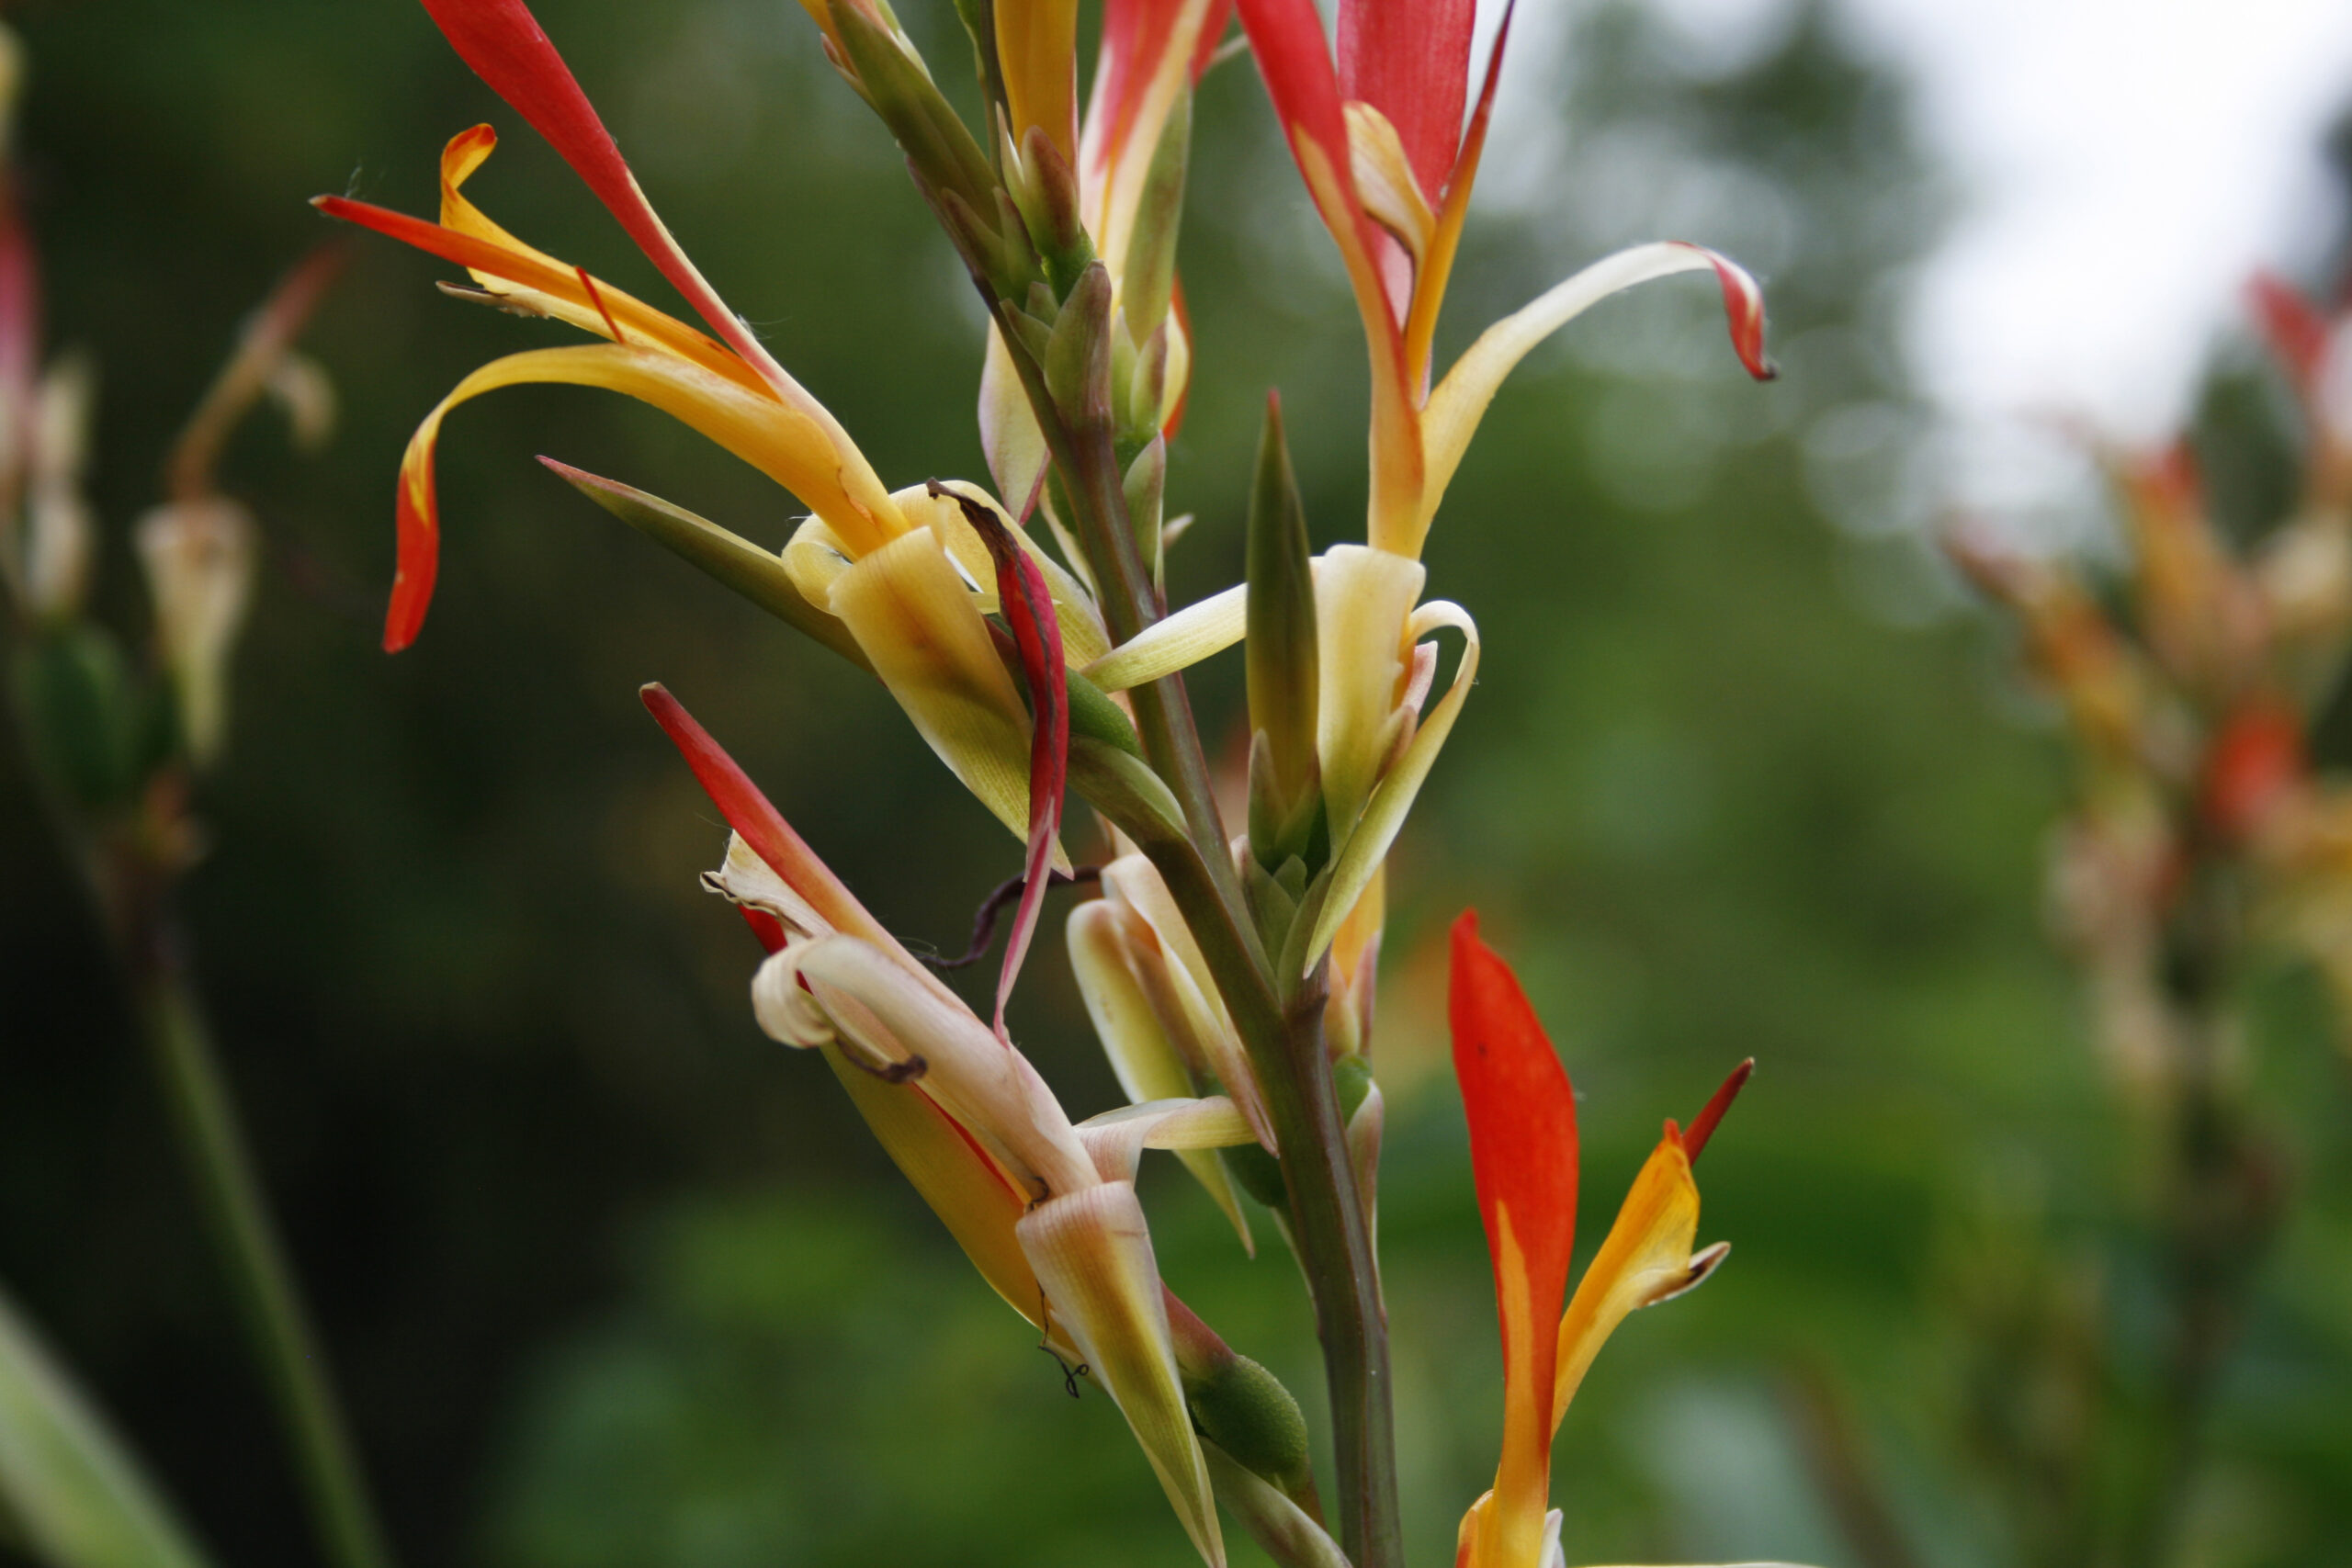 Flame-coloured flowers in the Adelaide Botanical Garden